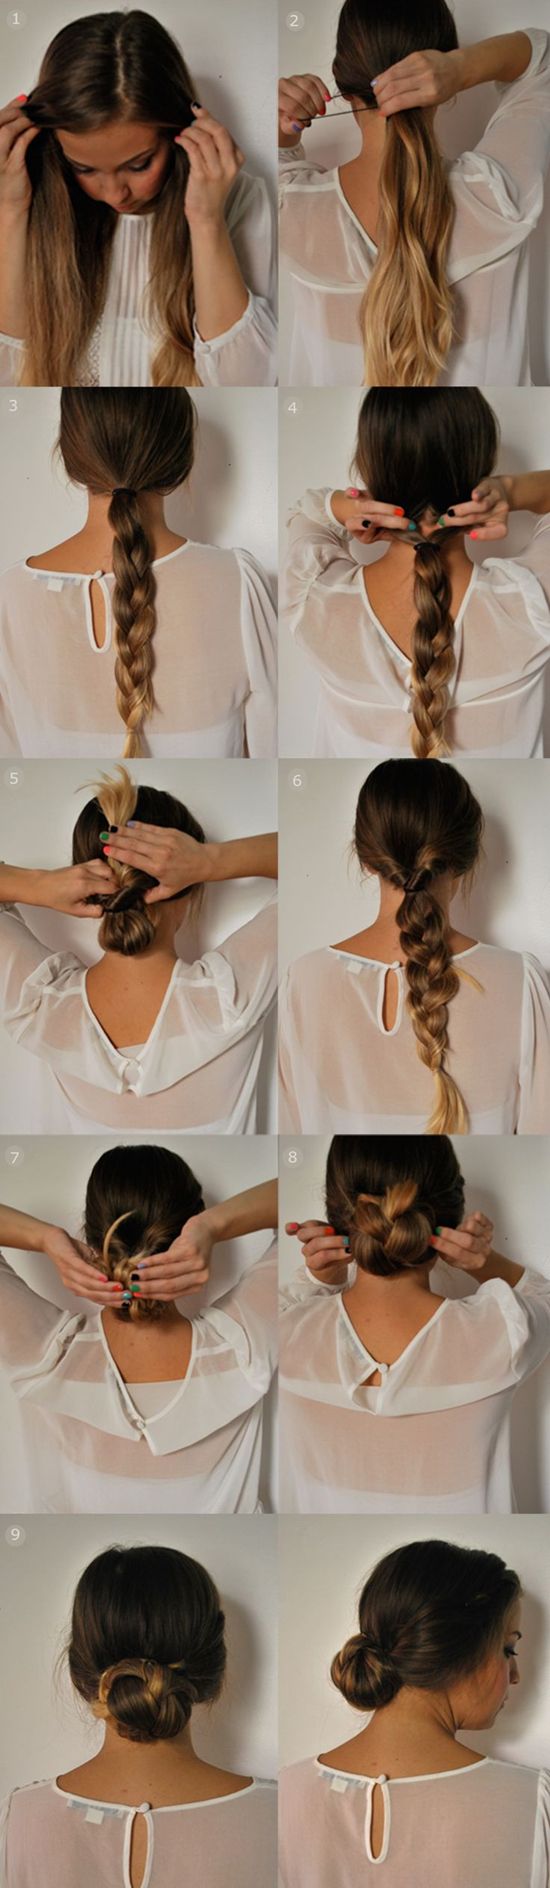 simple-hairstyles-for-long-hair-to-do-at-home-80_7 Simple hairstyles for long hair to do at home